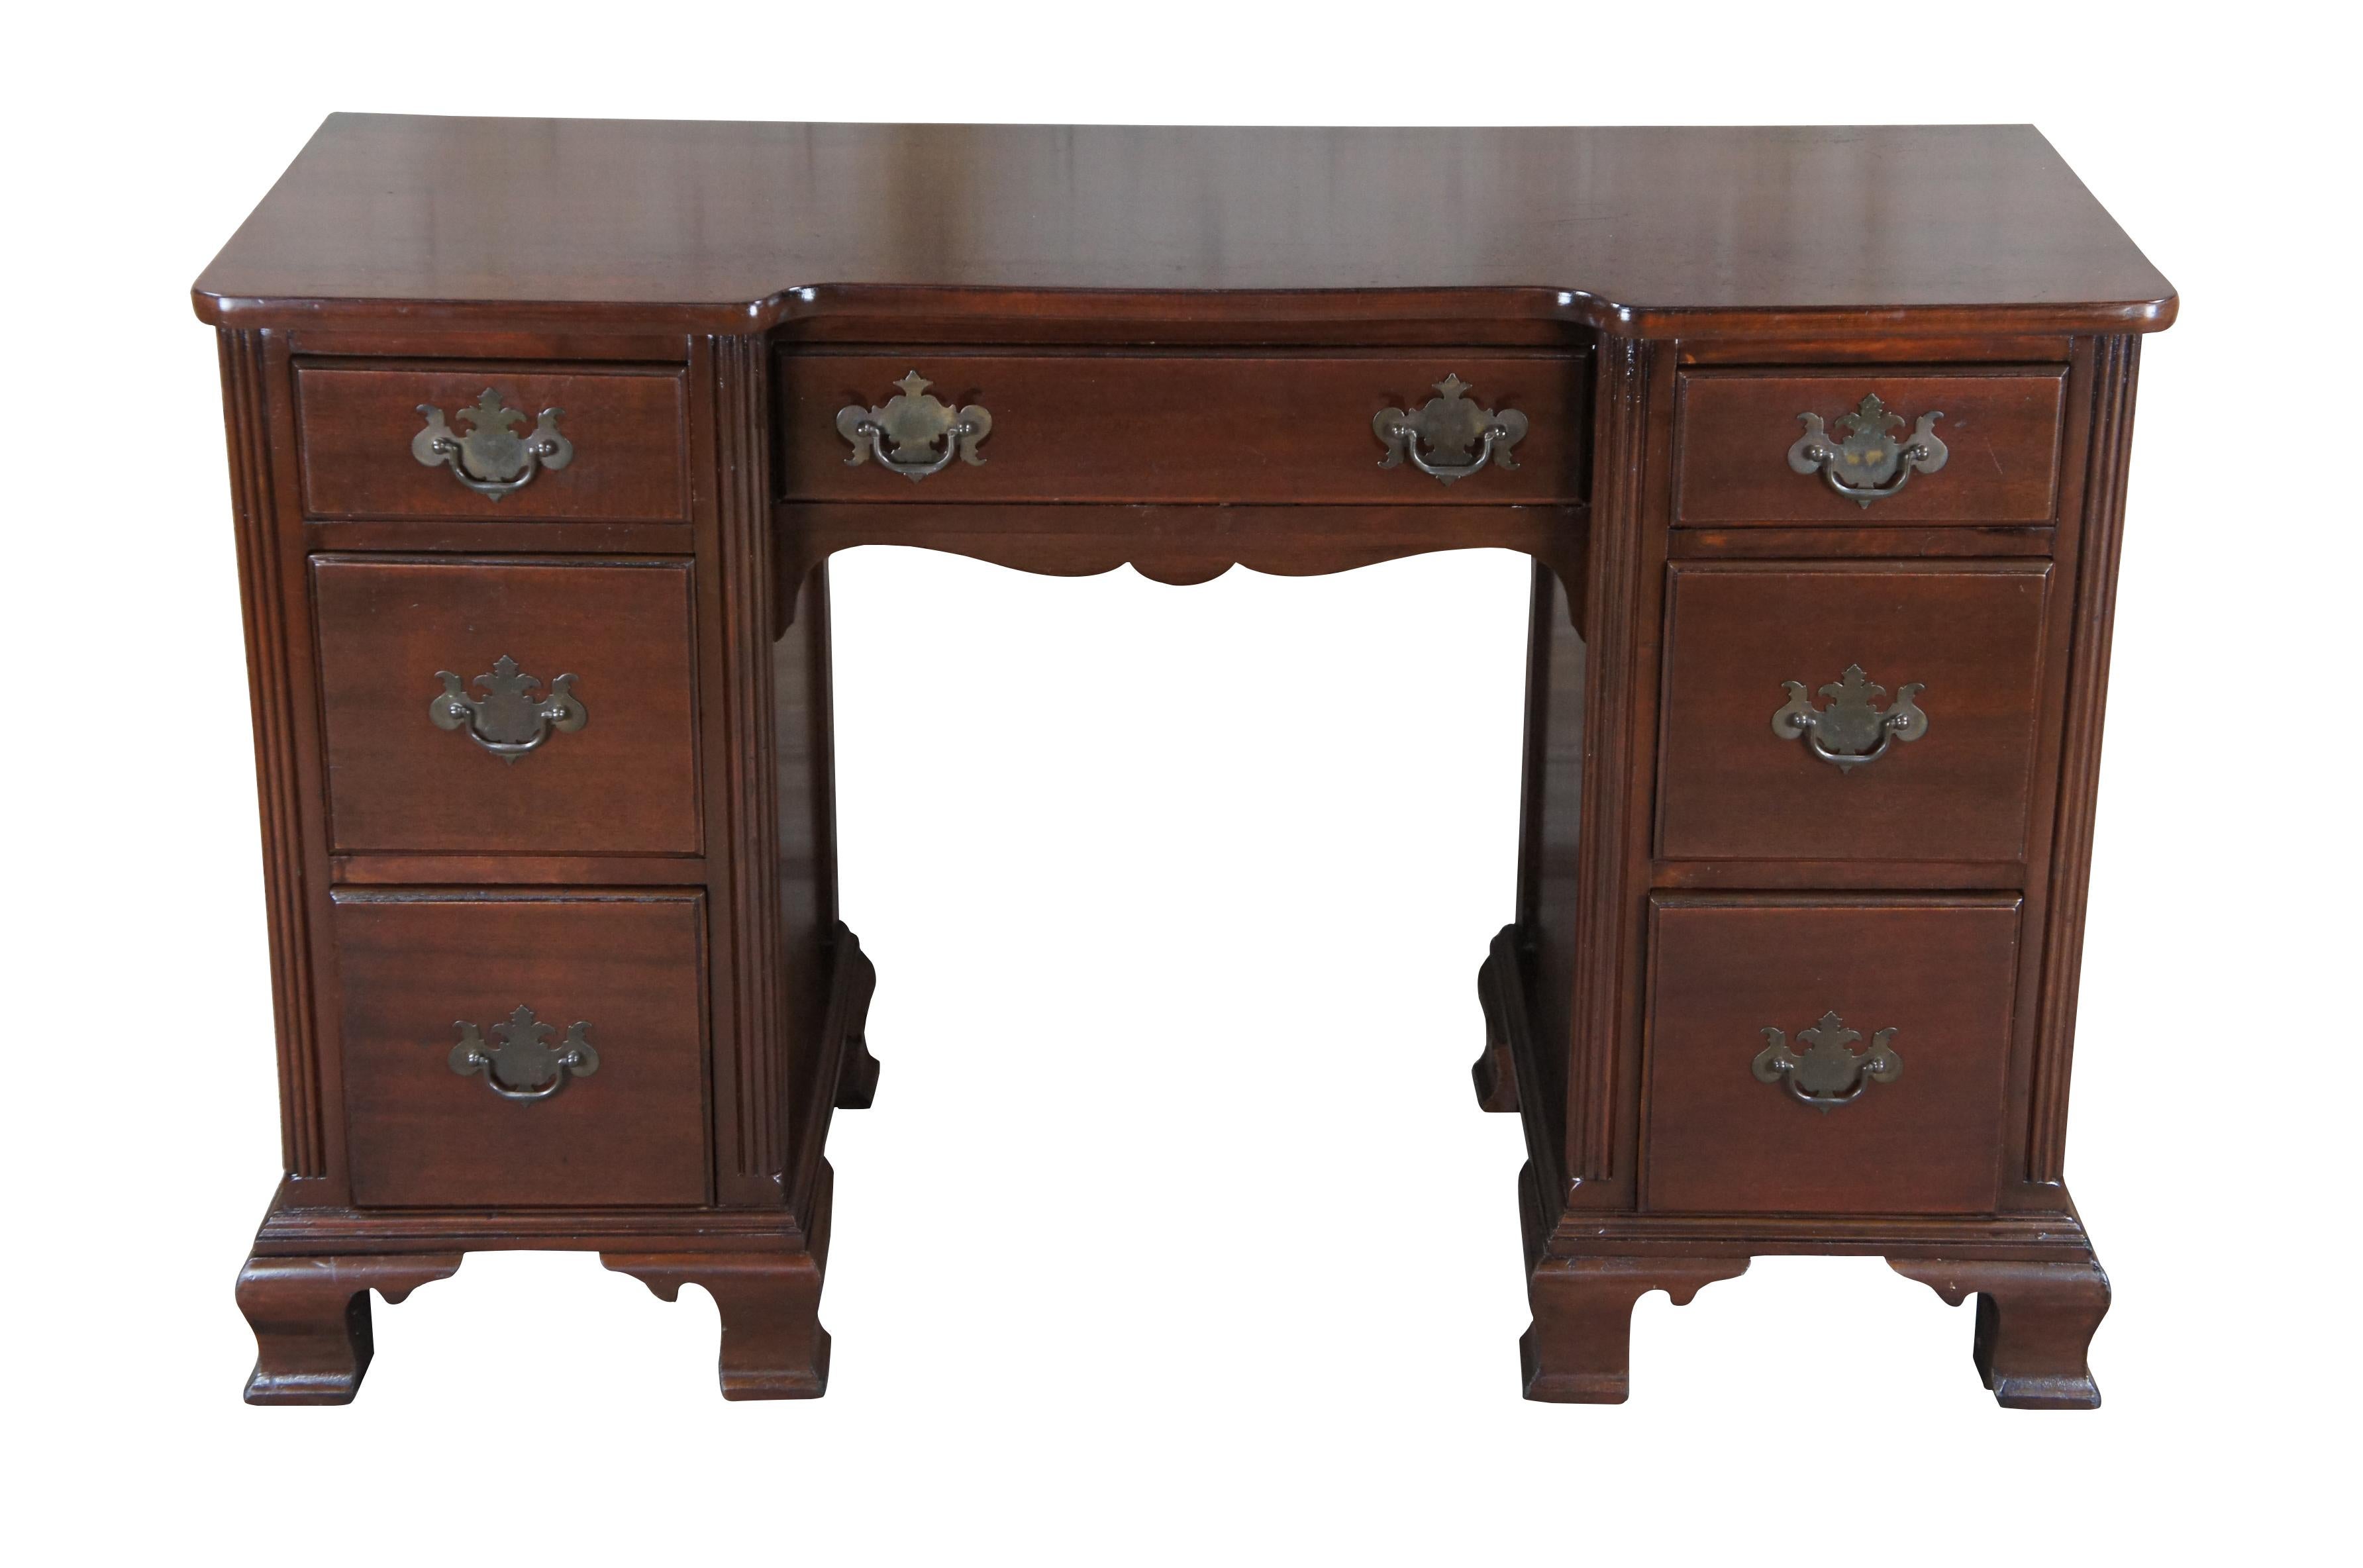 Circa 1940s mahogany knee hole writing or vanity desk featuring seven drawers with colonial brass bat wing hardware and matching serpentine mirror with open pediment and pineapple finial.

Measures: 48